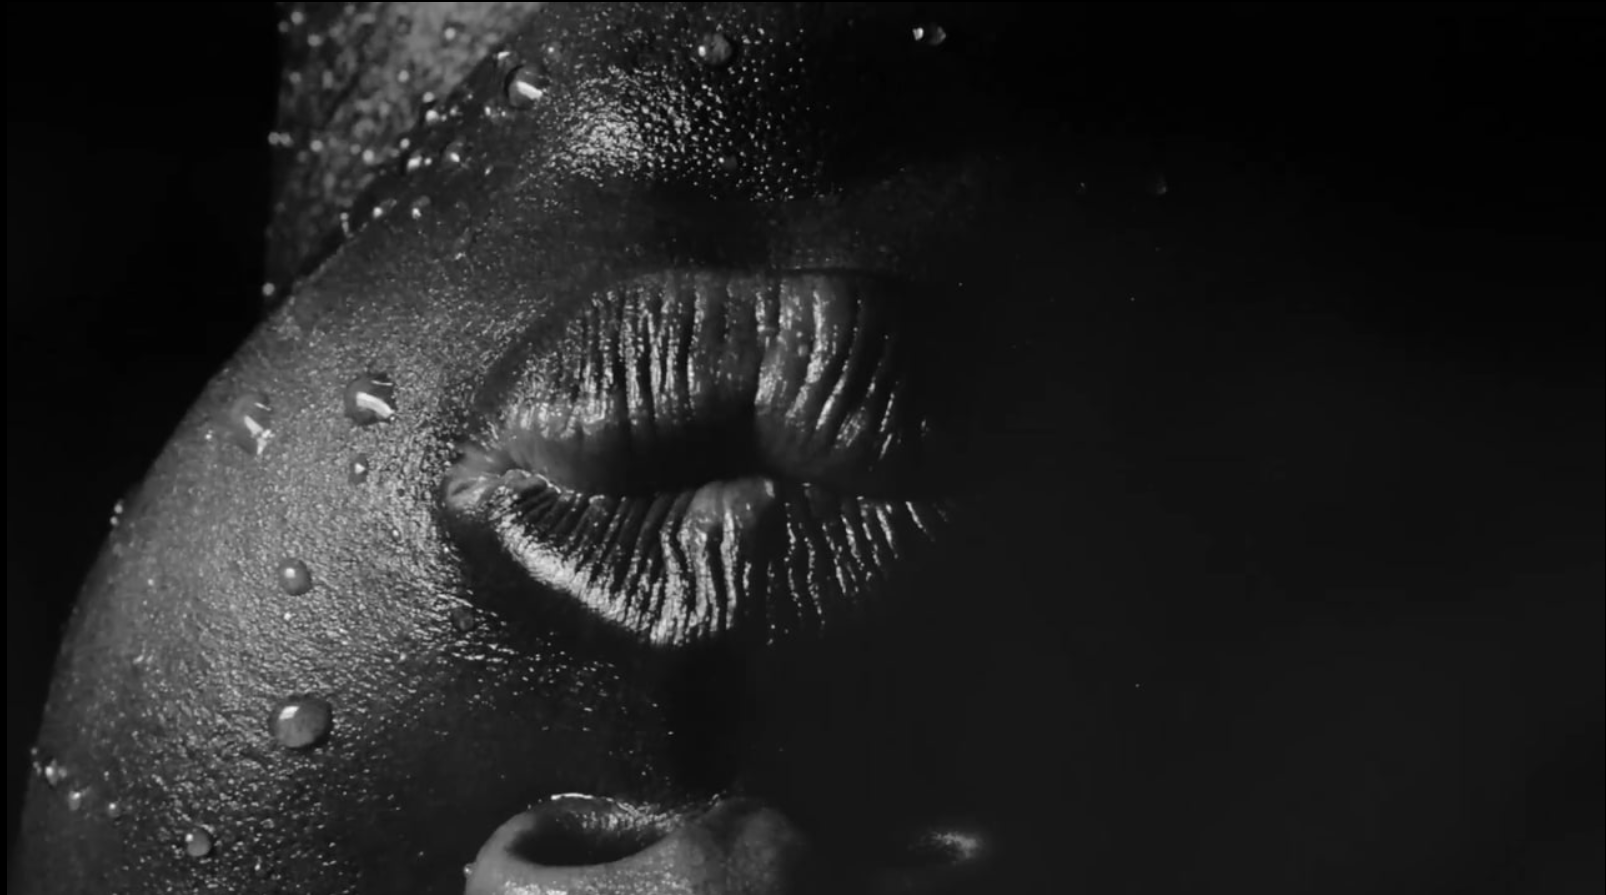 A still frame from Tony Yanick's monochrome video 'Make America Great Again (and again...and again)' depicts close-up and upside-down view of an individual's mouth.
